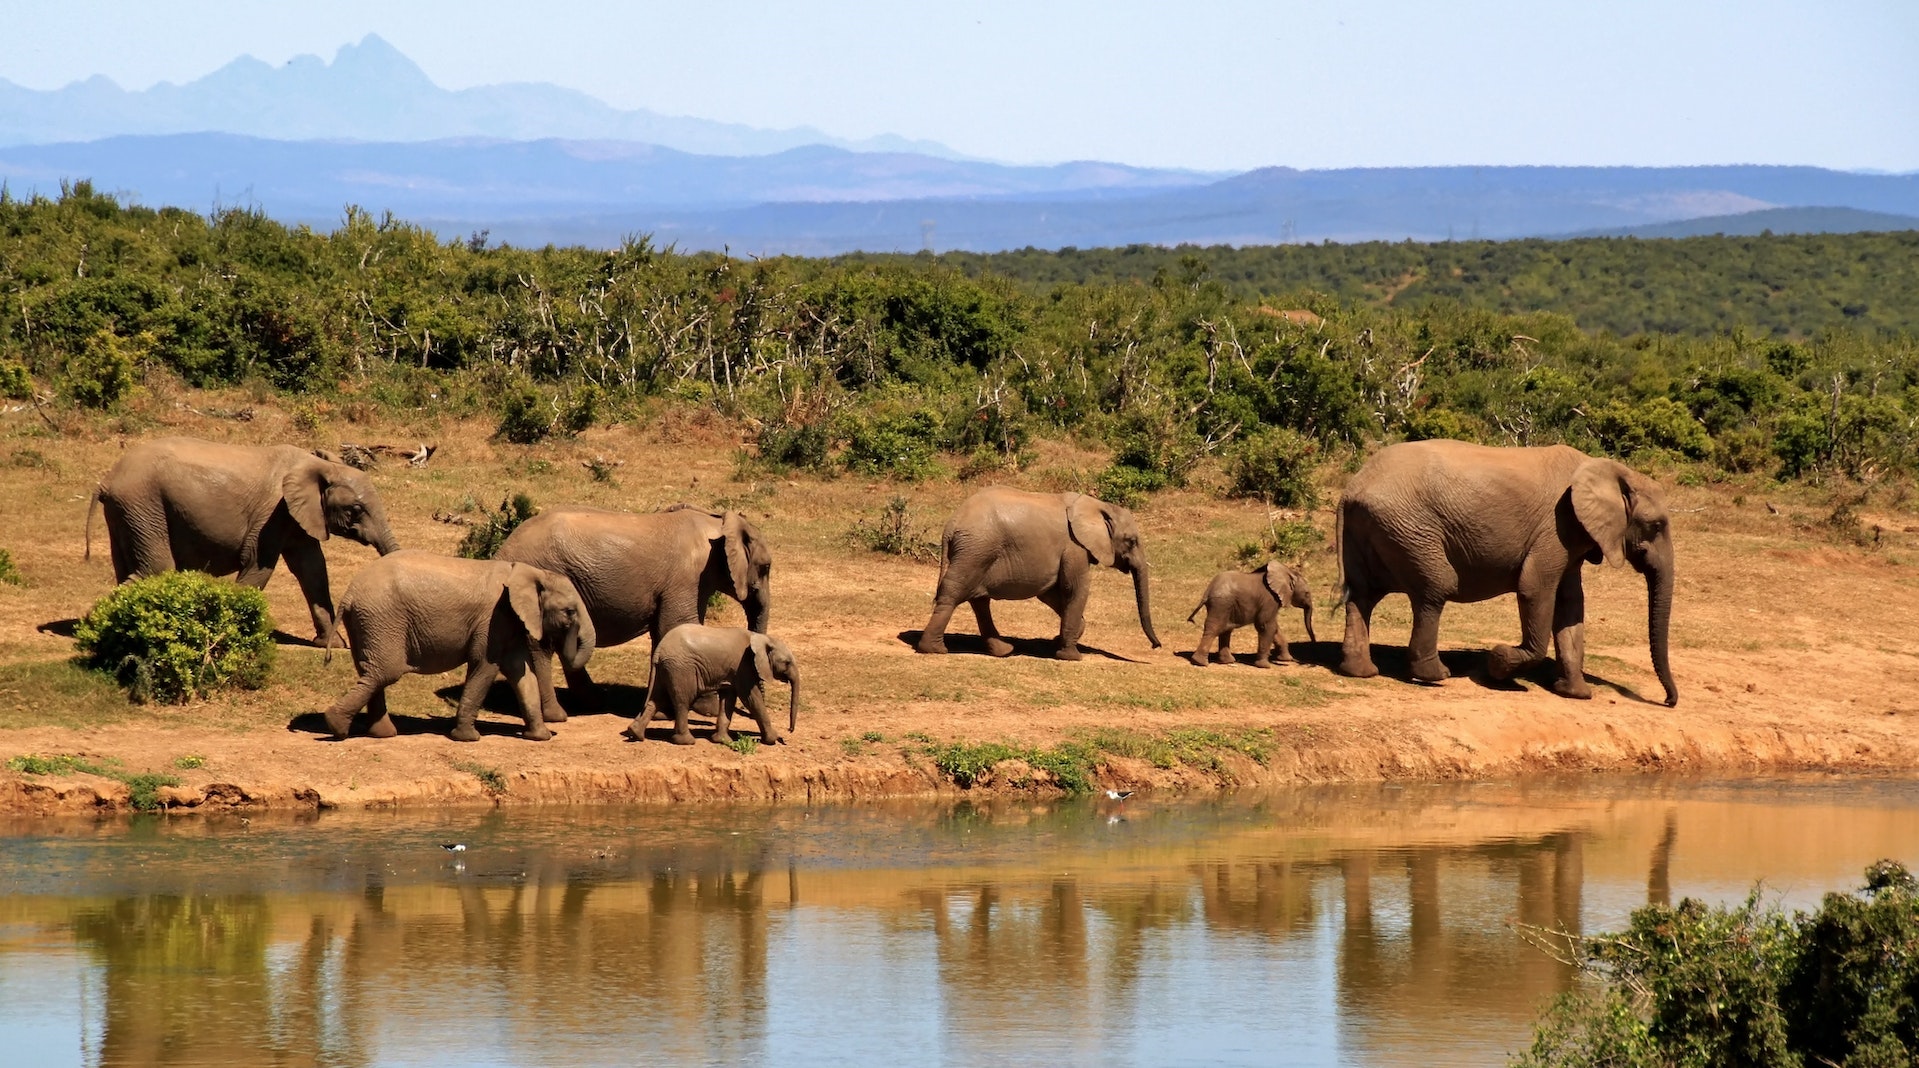 Are Animal Safaris Ethical? It's Not An Easy Question